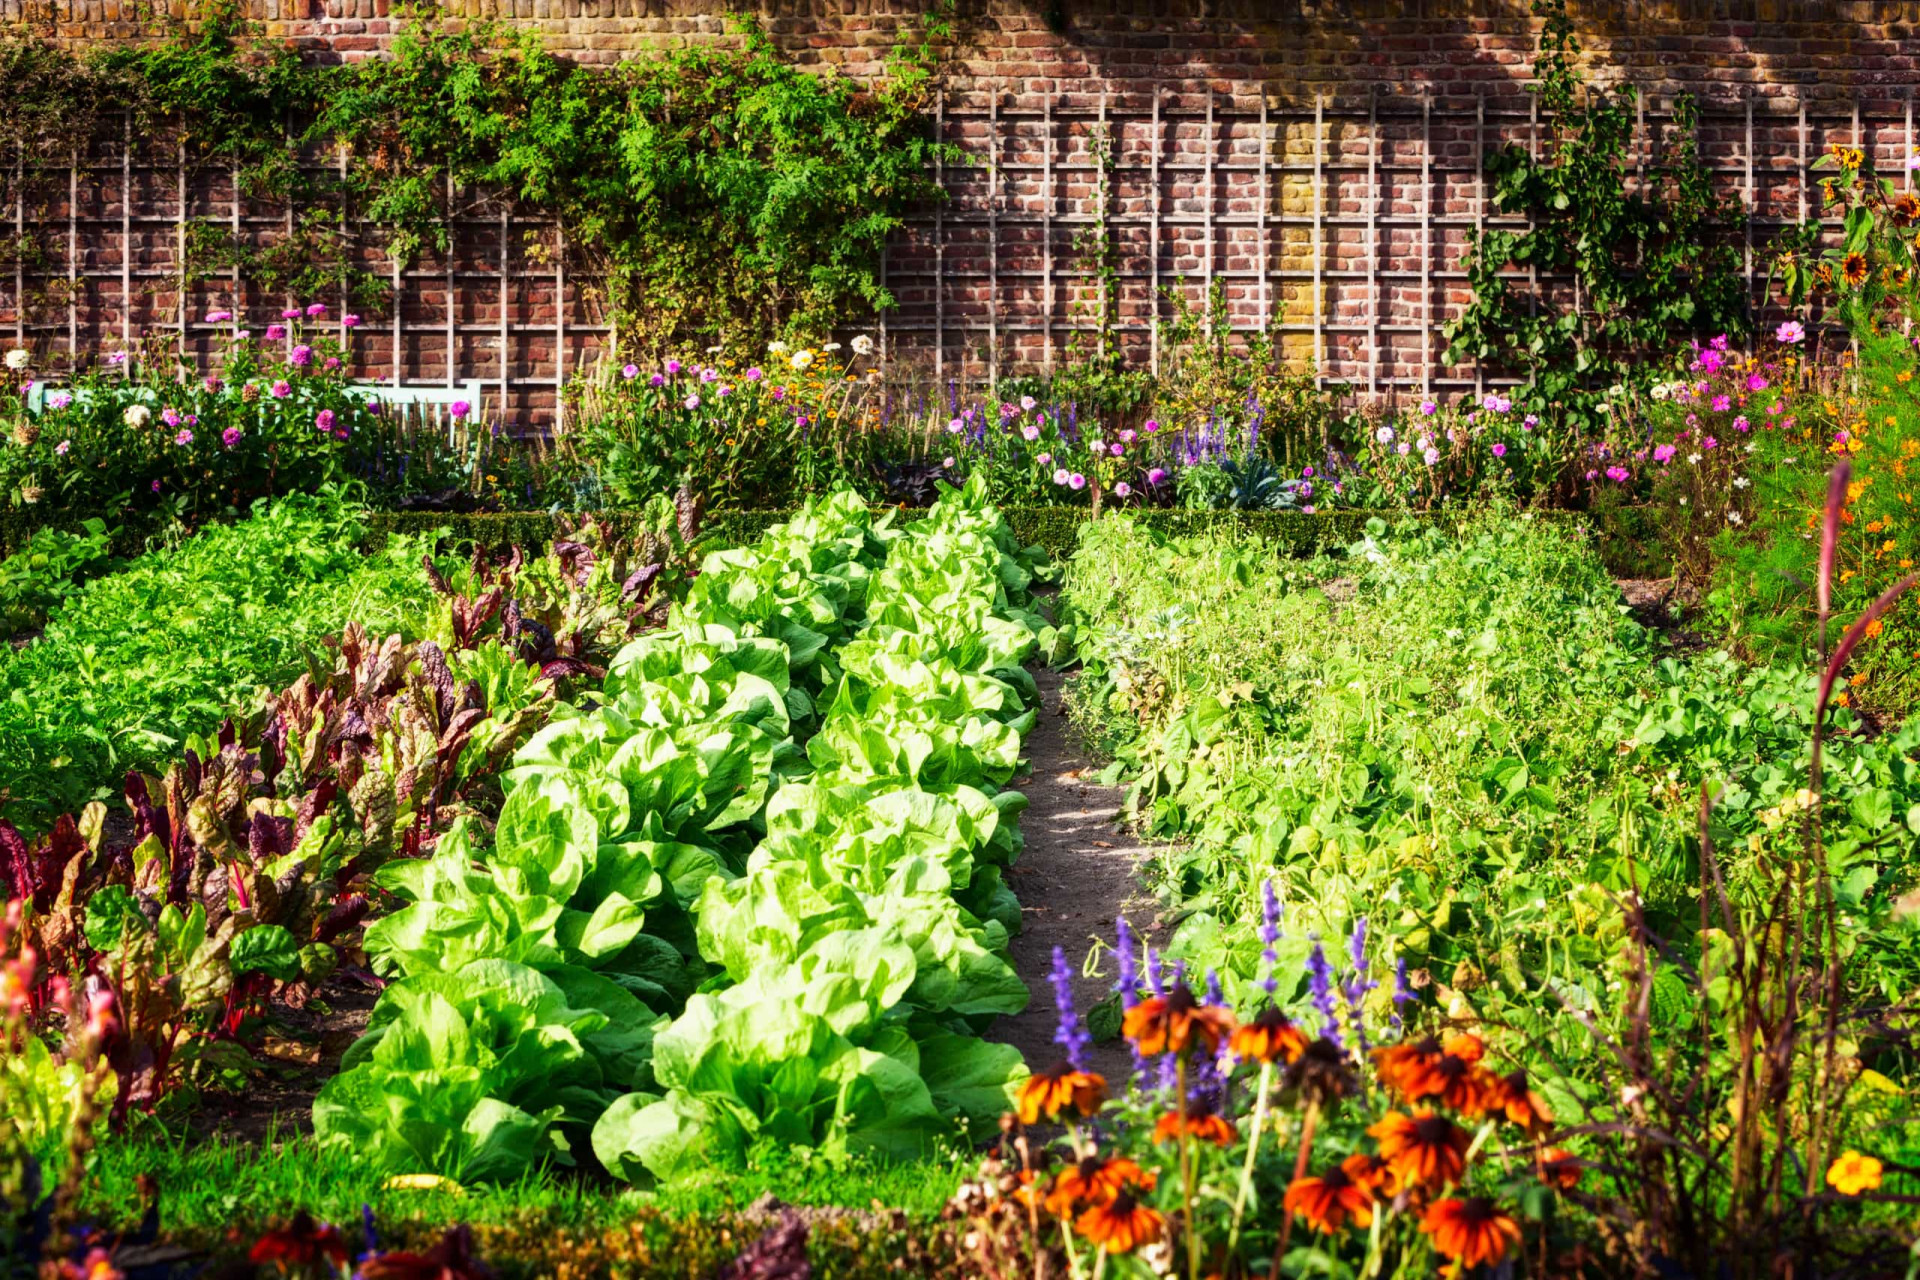 <p>When it comes to growing food, this is not always the case. For example, over-composting can add too much organic matter to the soil, causing problems such as disease and poor drainage. Also, overusing fertilizers can cause runoff and impact waterways.</p><p>You may also like:<a href="https://www.starsinsider.com/n/181365?utm_source=msn.com&utm_medium=display&utm_campaign=referral_description&utm_content=491515en-us"> How to identify the warning signs of a stroke</a></p>